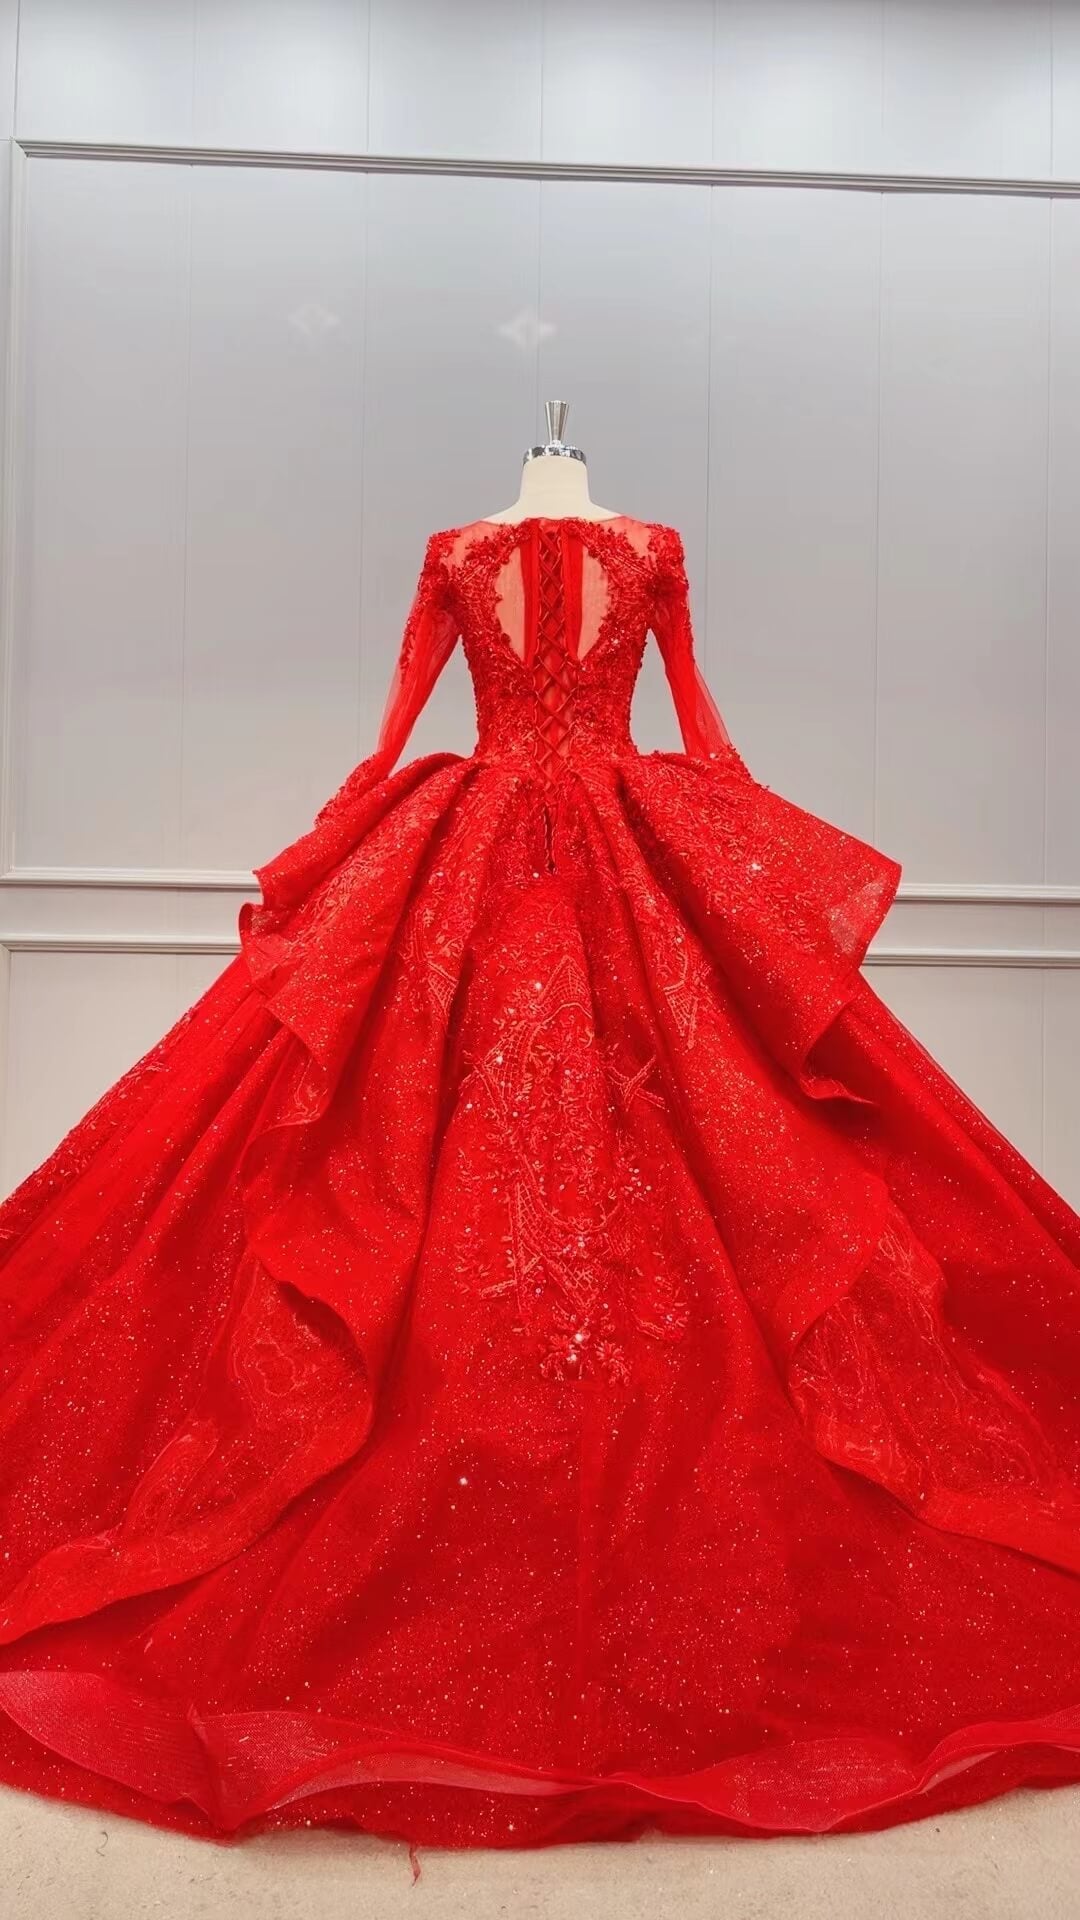 Modest Red Wedding Gowns with Long Sleeves 51012-Quinceanera Dresses-Viniodress-Viniodress